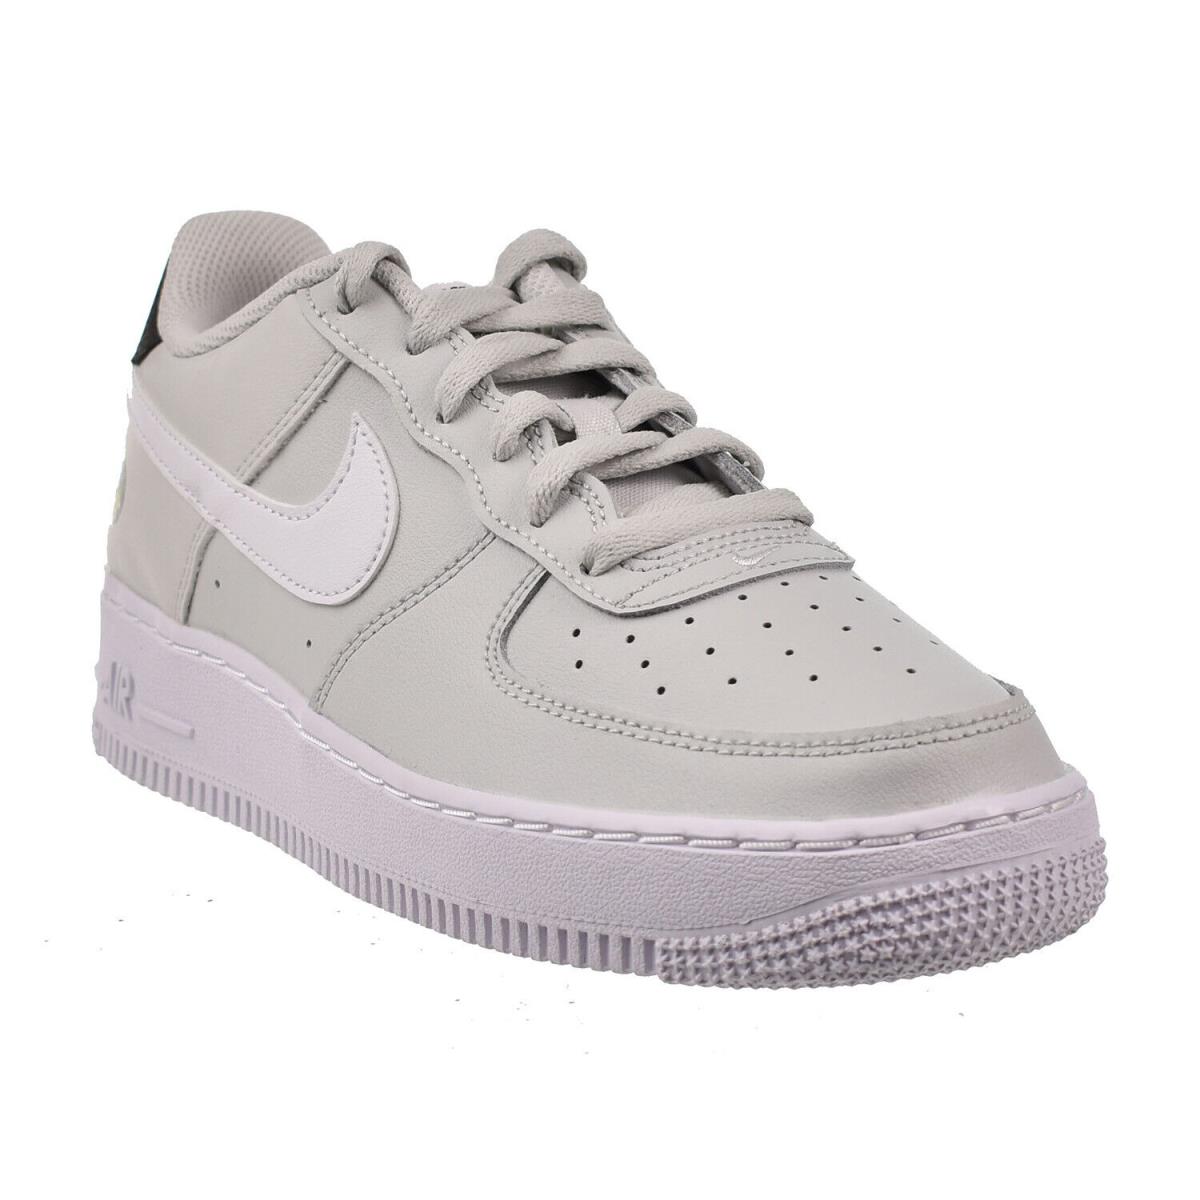 Nike Air Force 1 Low LV8 Have a Nike Day Earth GS Big Kids` Shoes Photon Dust - Photon Dust